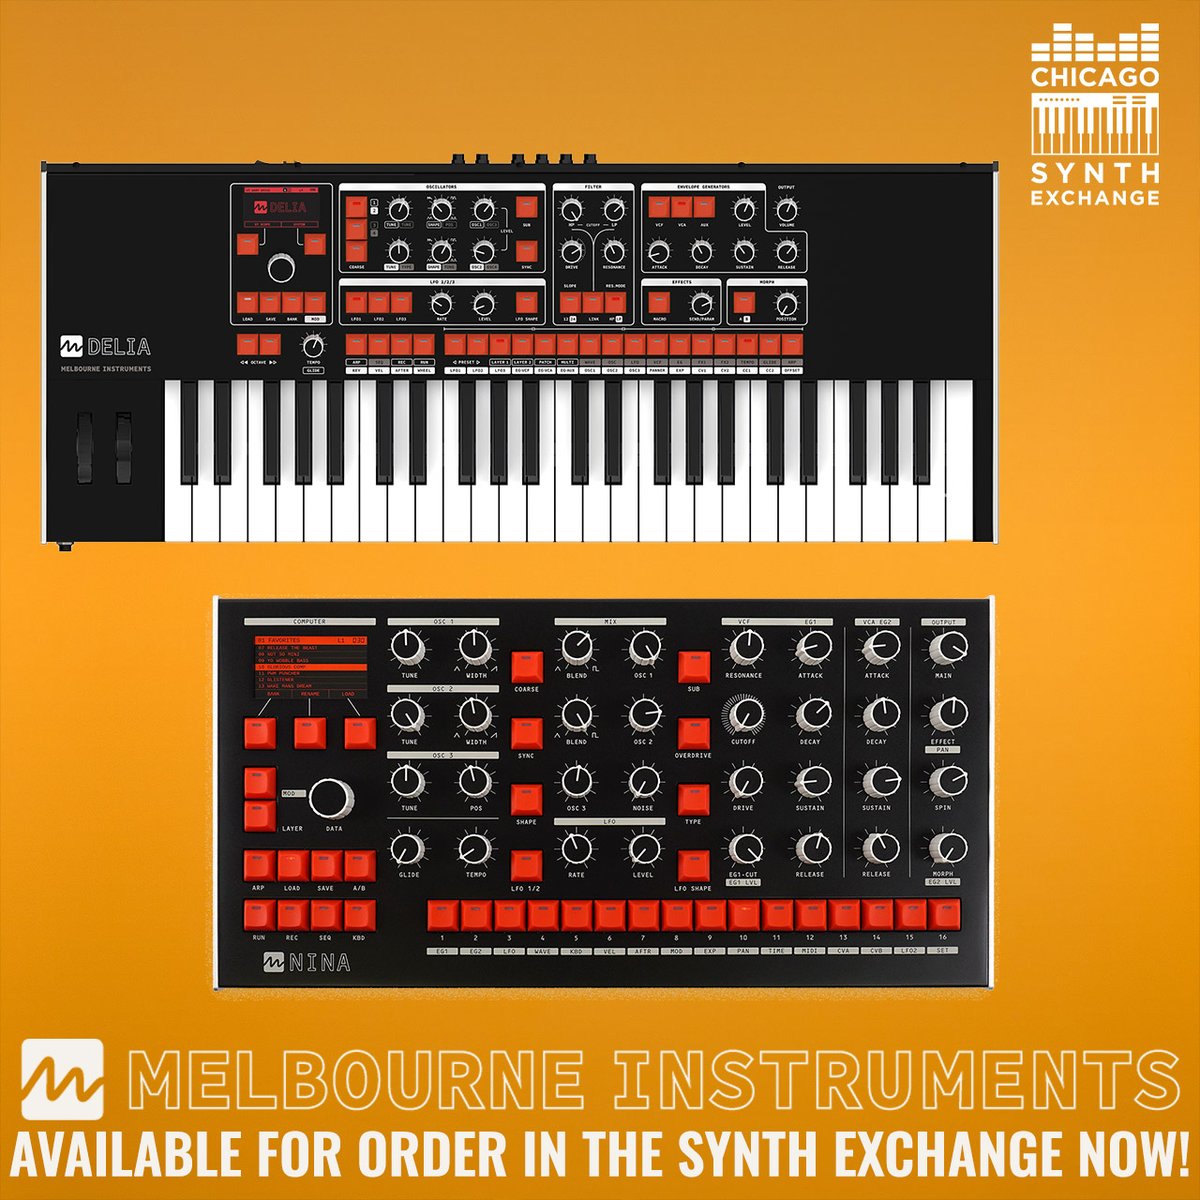 Just announced at Superbooth 2024 and available to pre-order now at Chicago Synth Exchange, Melbourne Instruments Delia is a motorized morphing polyphonic synthesizer! Pre-order new Melbourne Instruments at the Synth Exchange today! bit.ly/44JsJiH #MelbourneInstruments